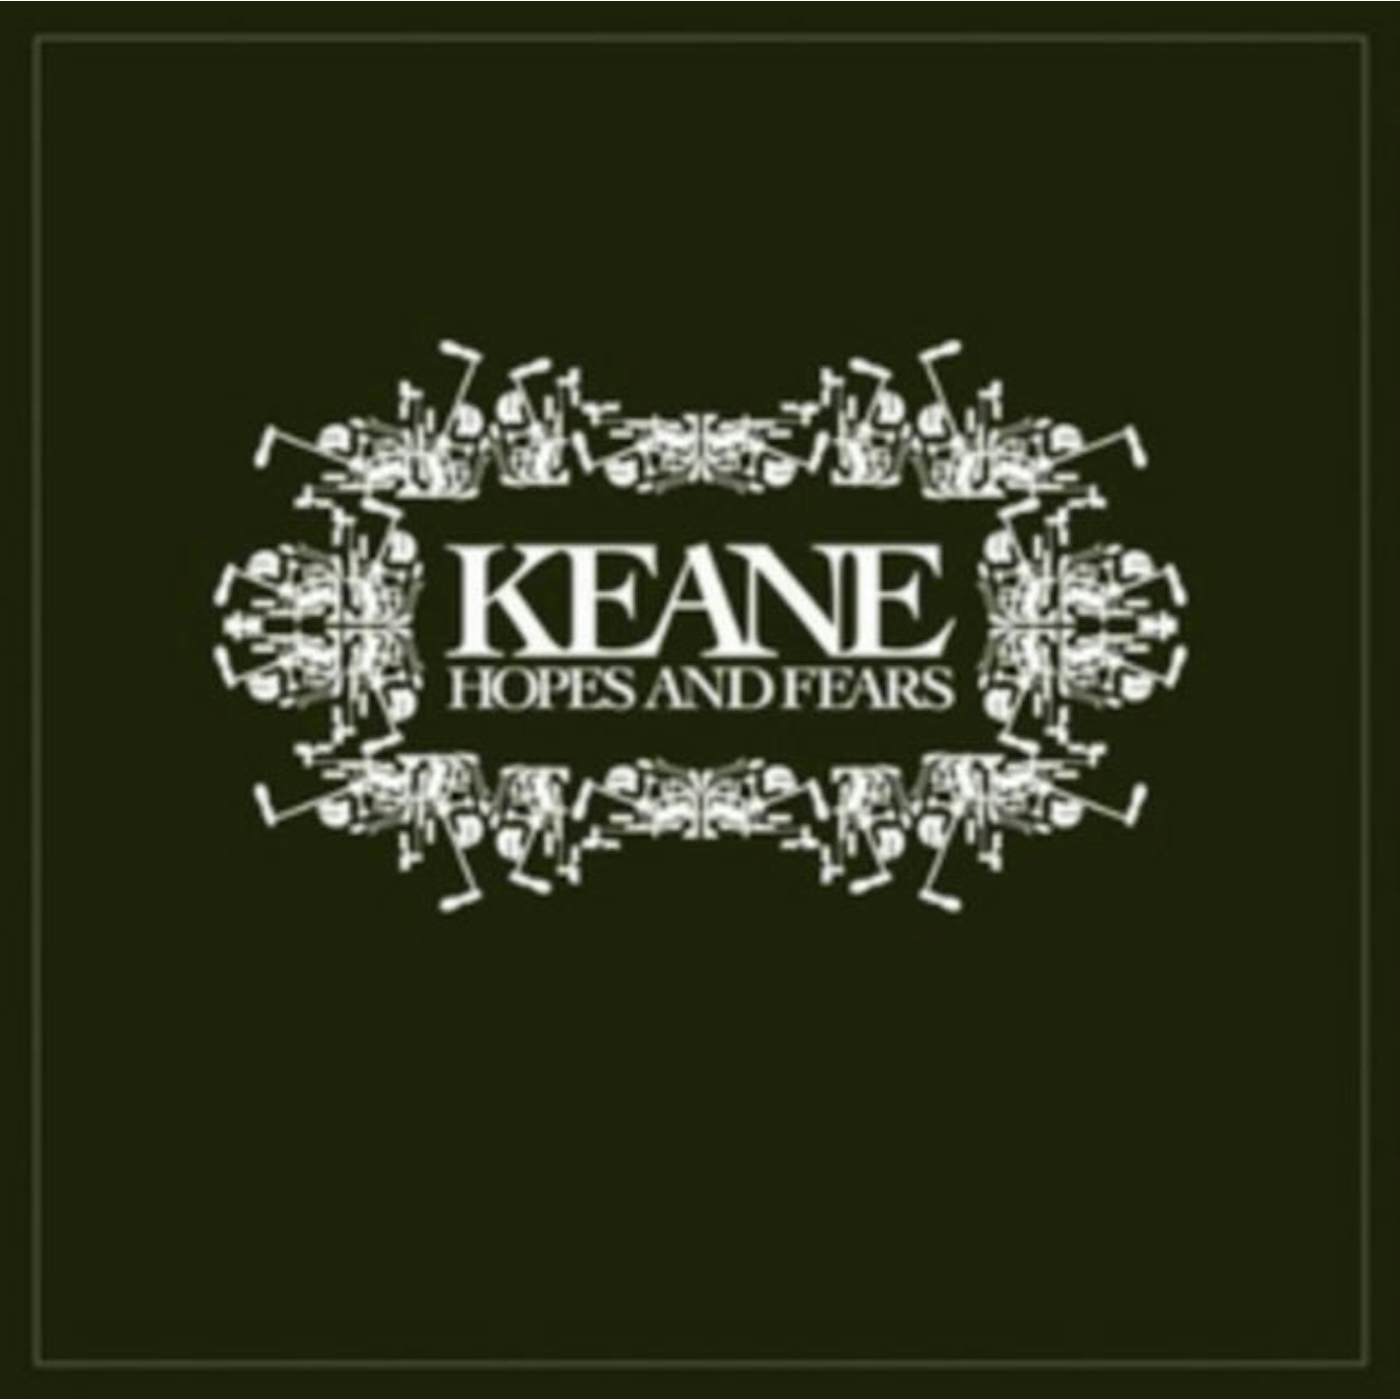 Keane LP Vinyl Record - Hopes And Fears